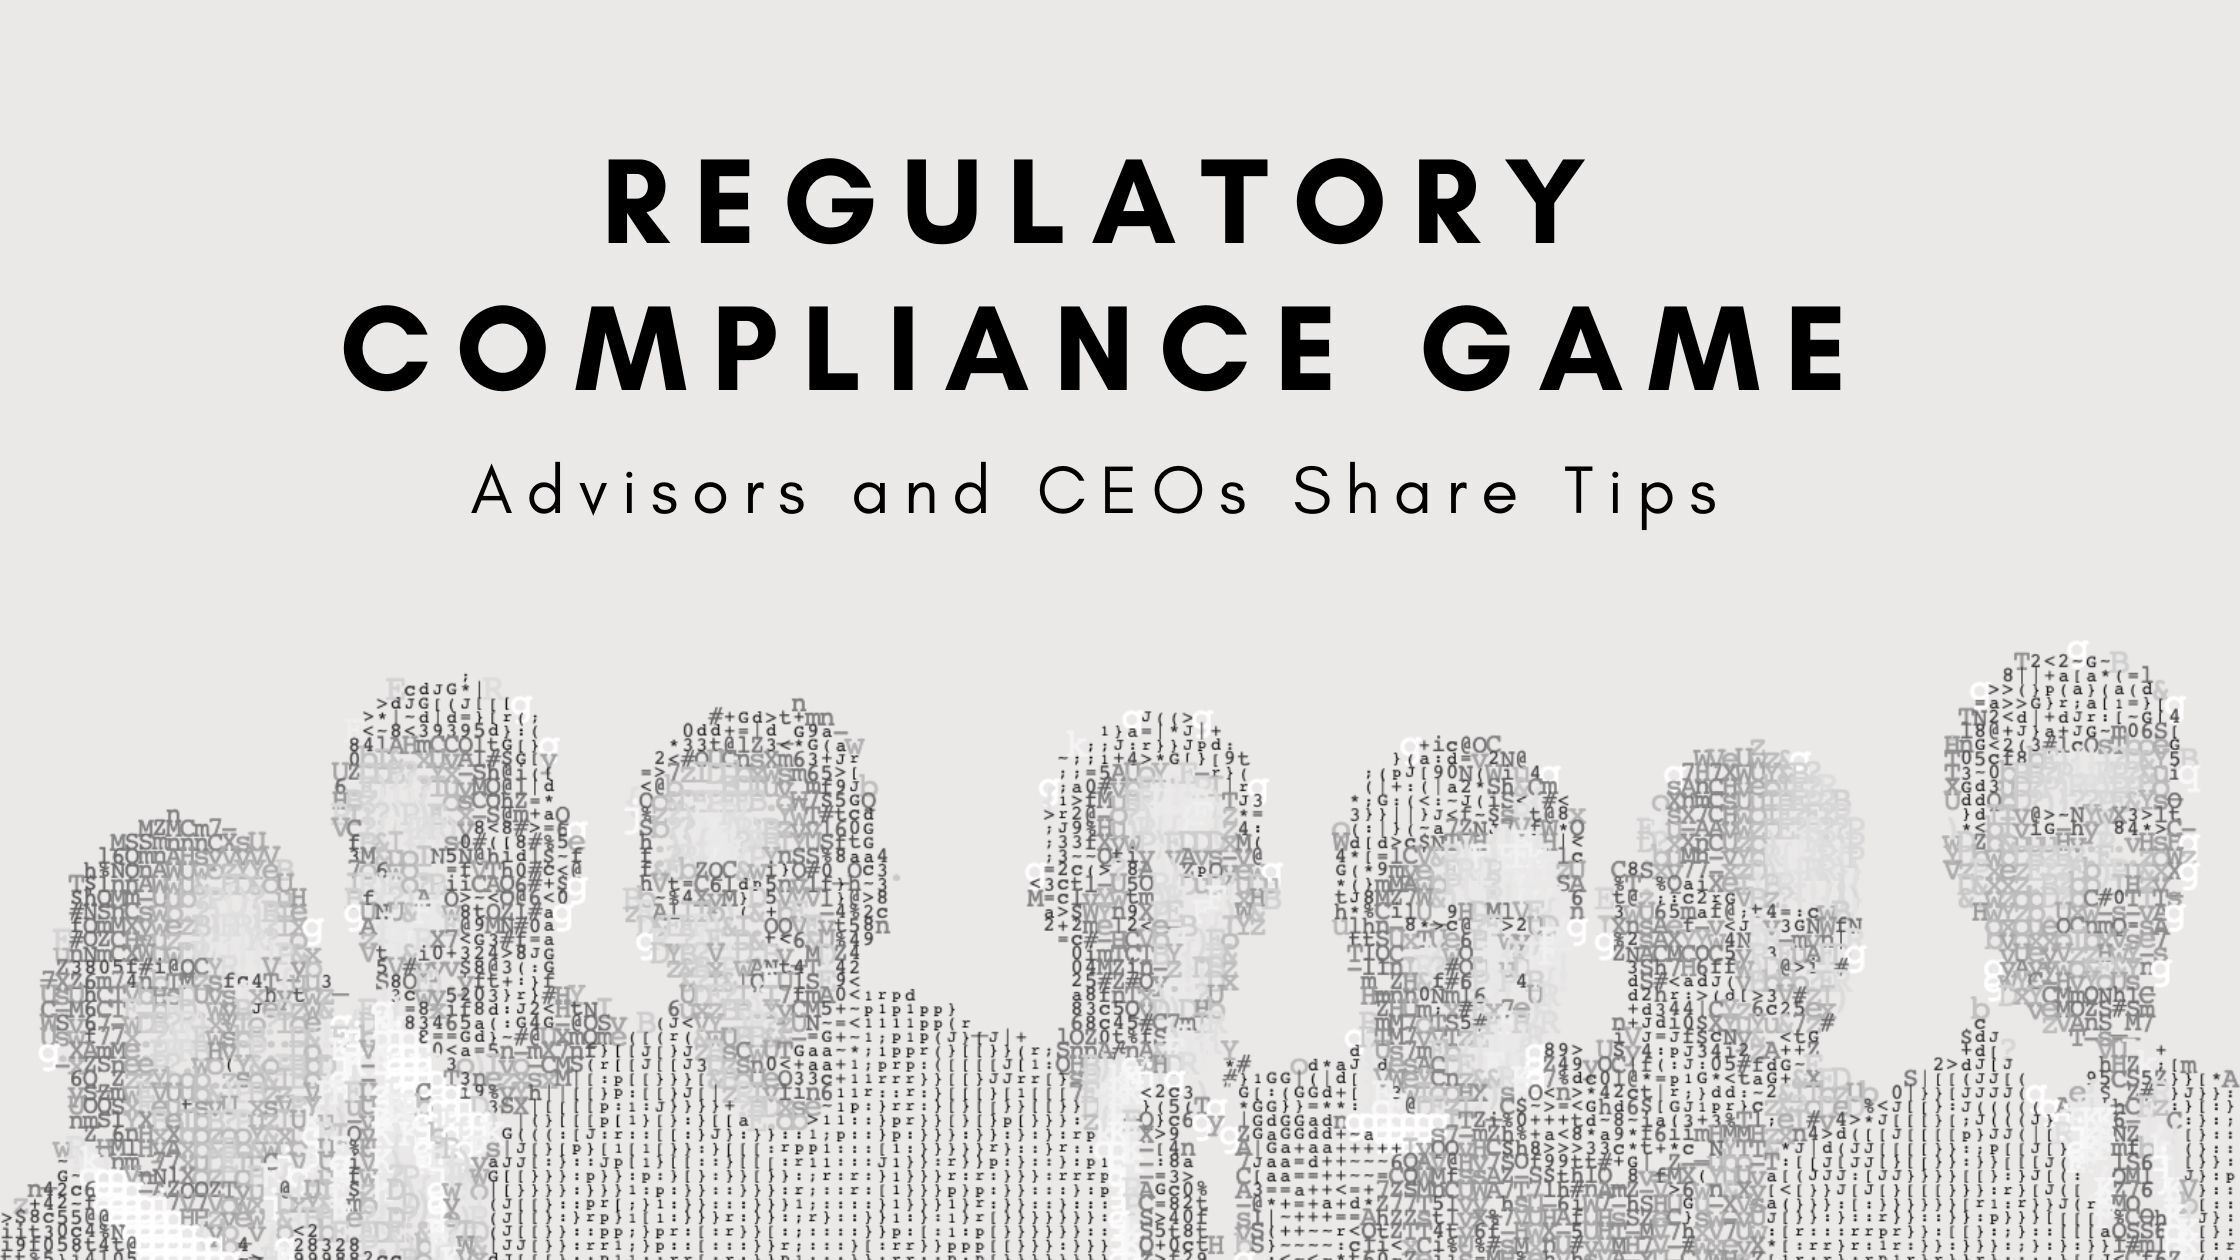 Can Fintechs Win the Regulatory Compliance Game? Advisors and CEOs Share Tips